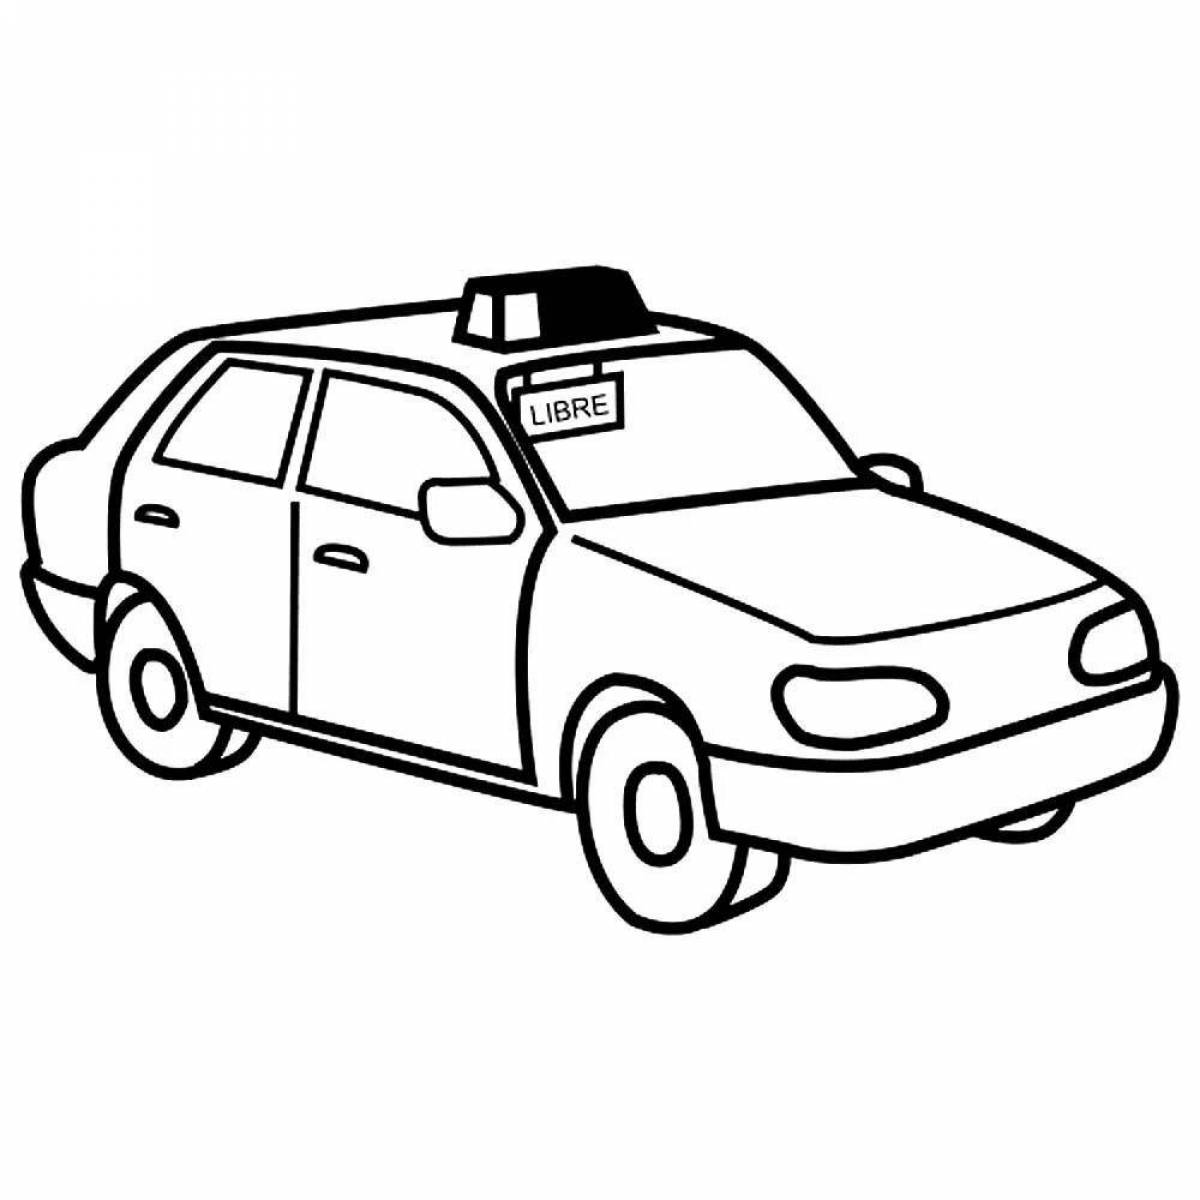 Charming taxi coloring book for kids 3-4 years old